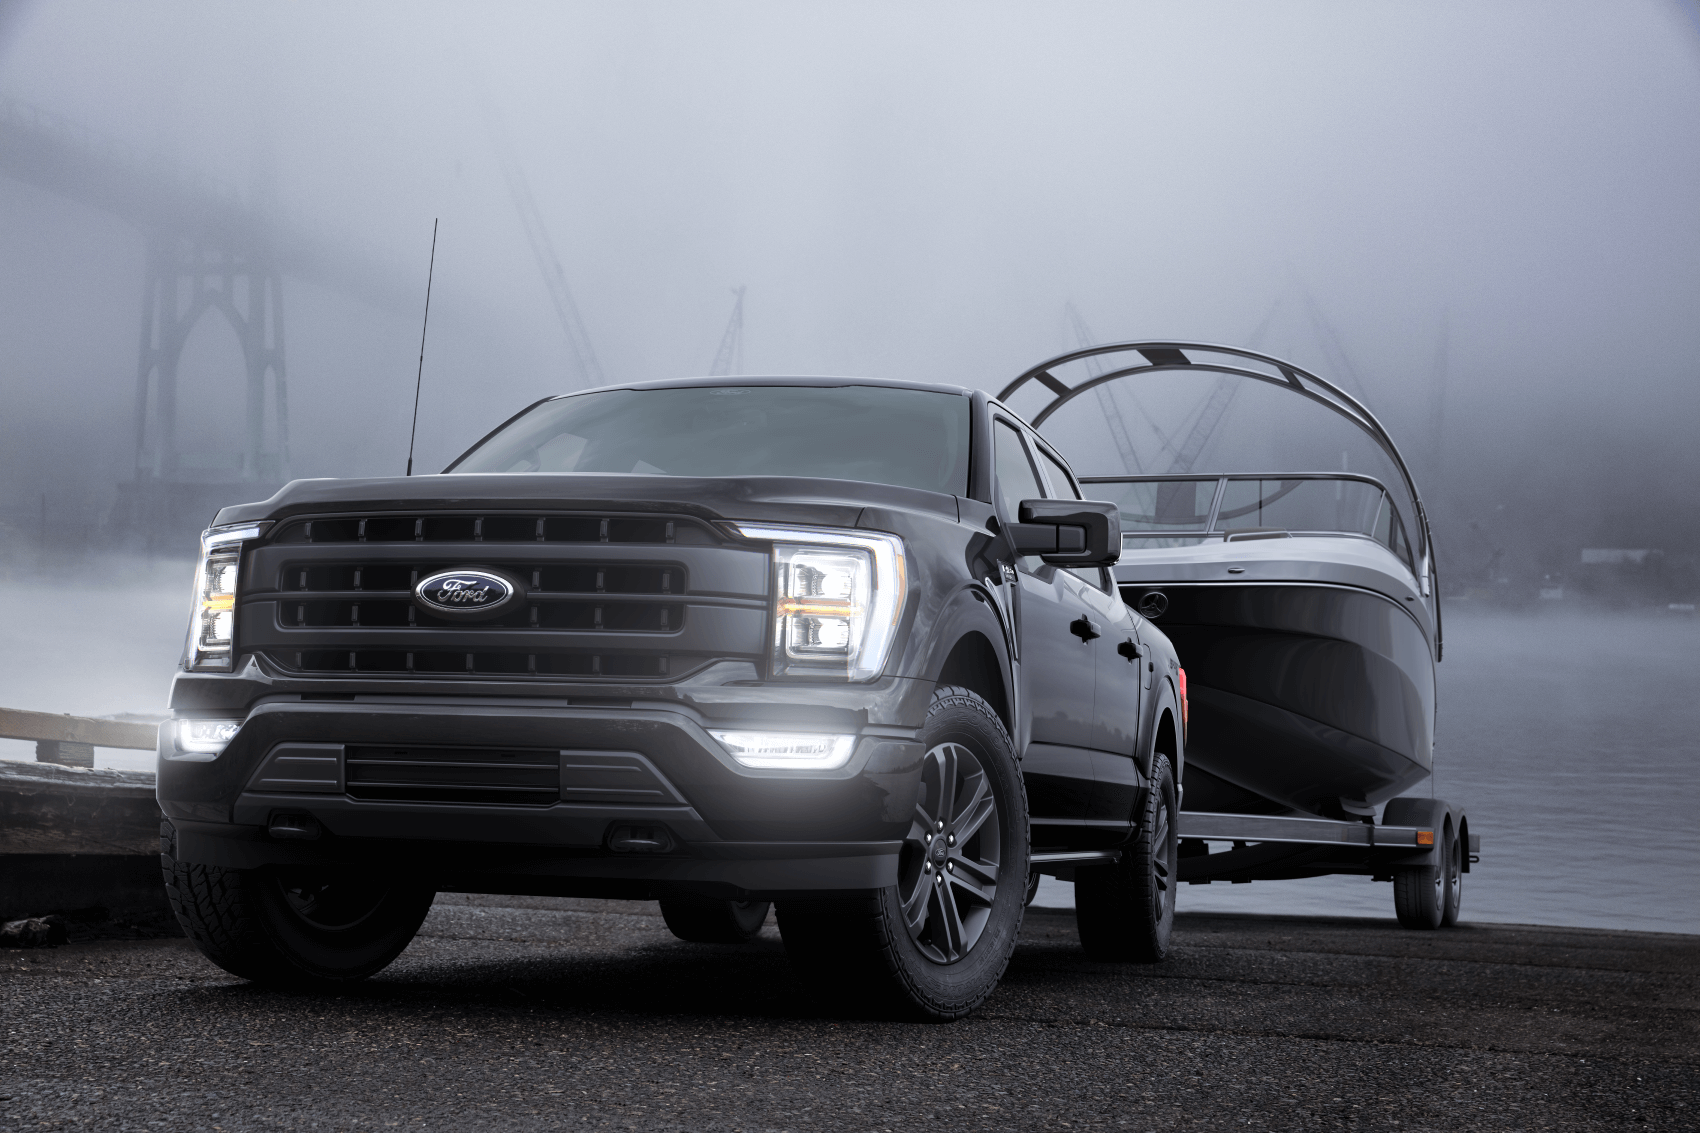 2021 Ford F-150 Towing Boat